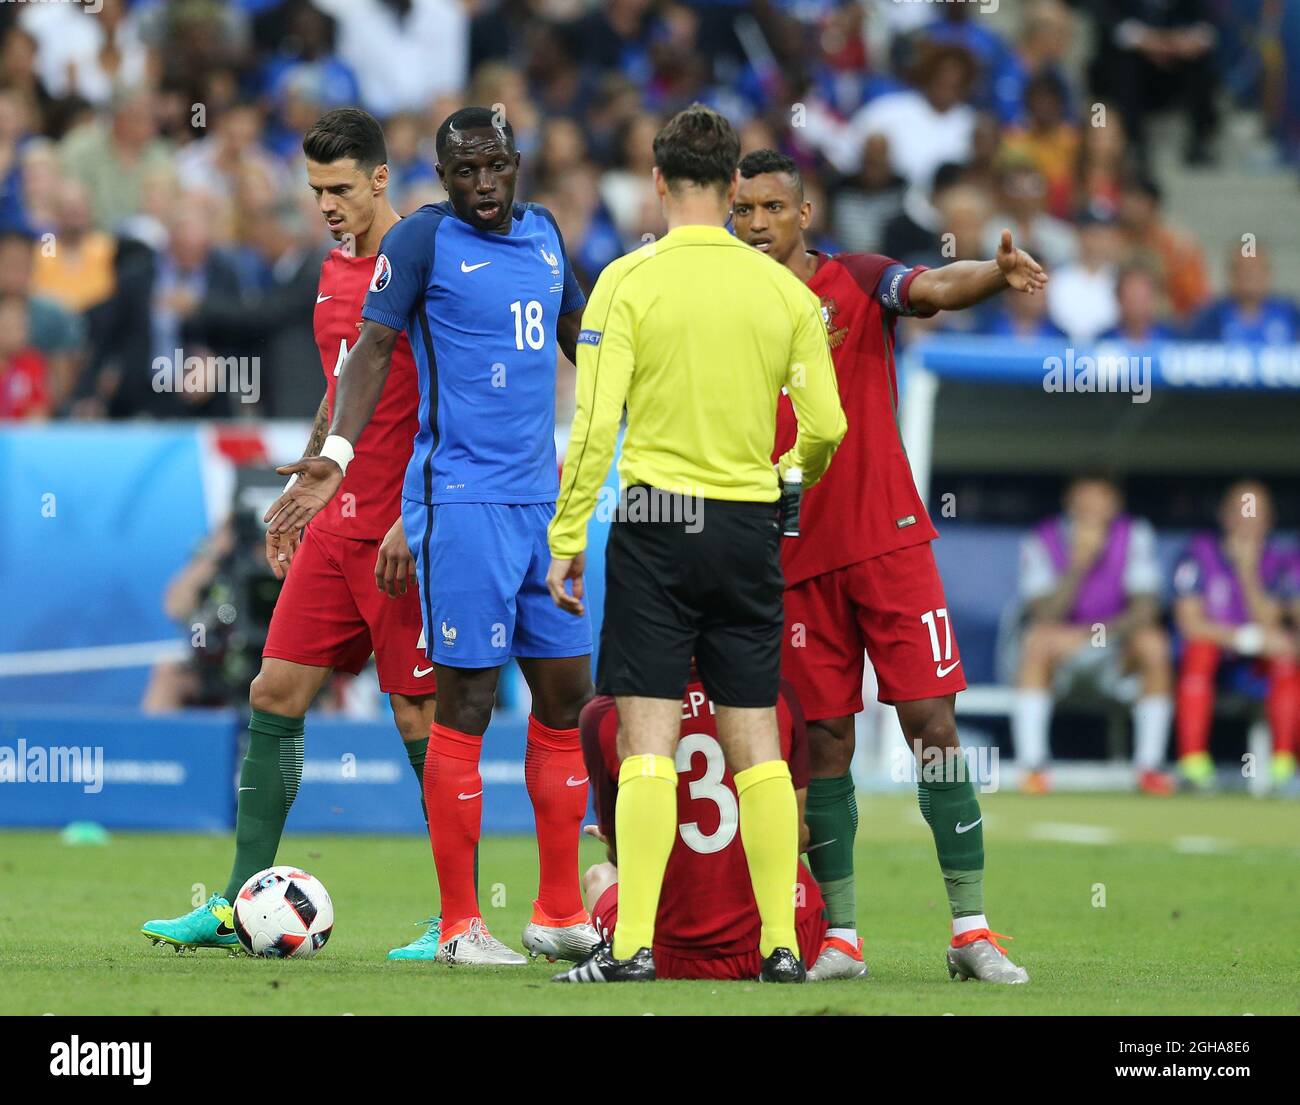 Moussa Sissoko of France protests his innocence following his tackle on Pepe of Portugal during the UEFA European Championship 2016 final match at the Stade de France, Paris. Picture date July 10th, 2016 Pic David Klein/Sportimage via PA Images Stock Photo